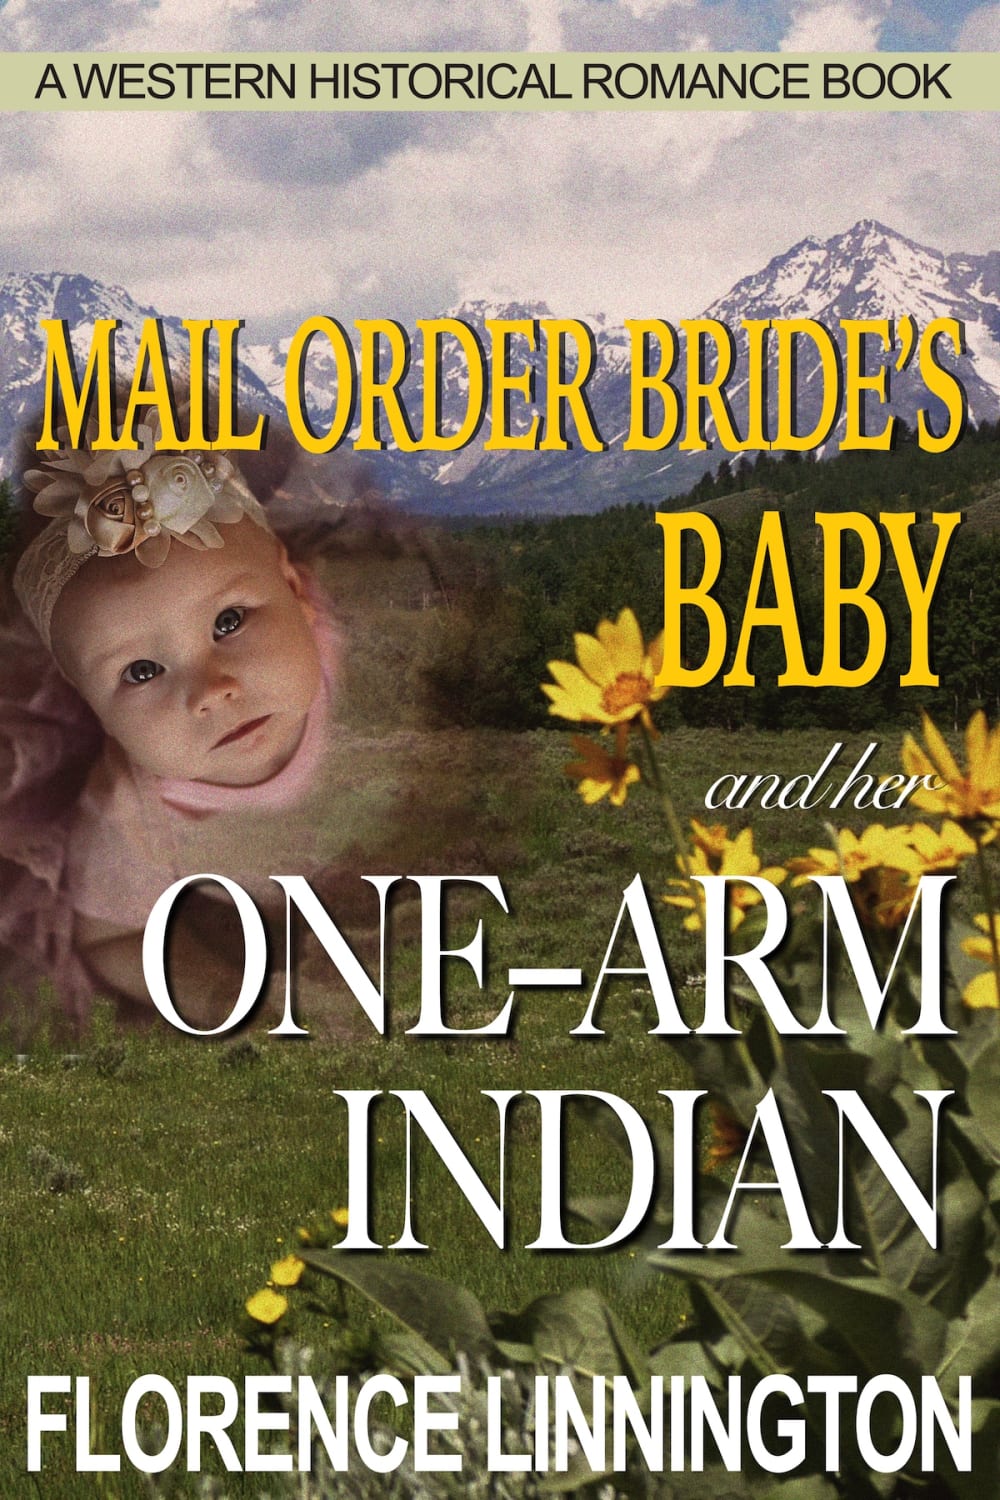 Mail Order Bride's Baby And Her One-Arm Indian (A Western Historical Romance Book)